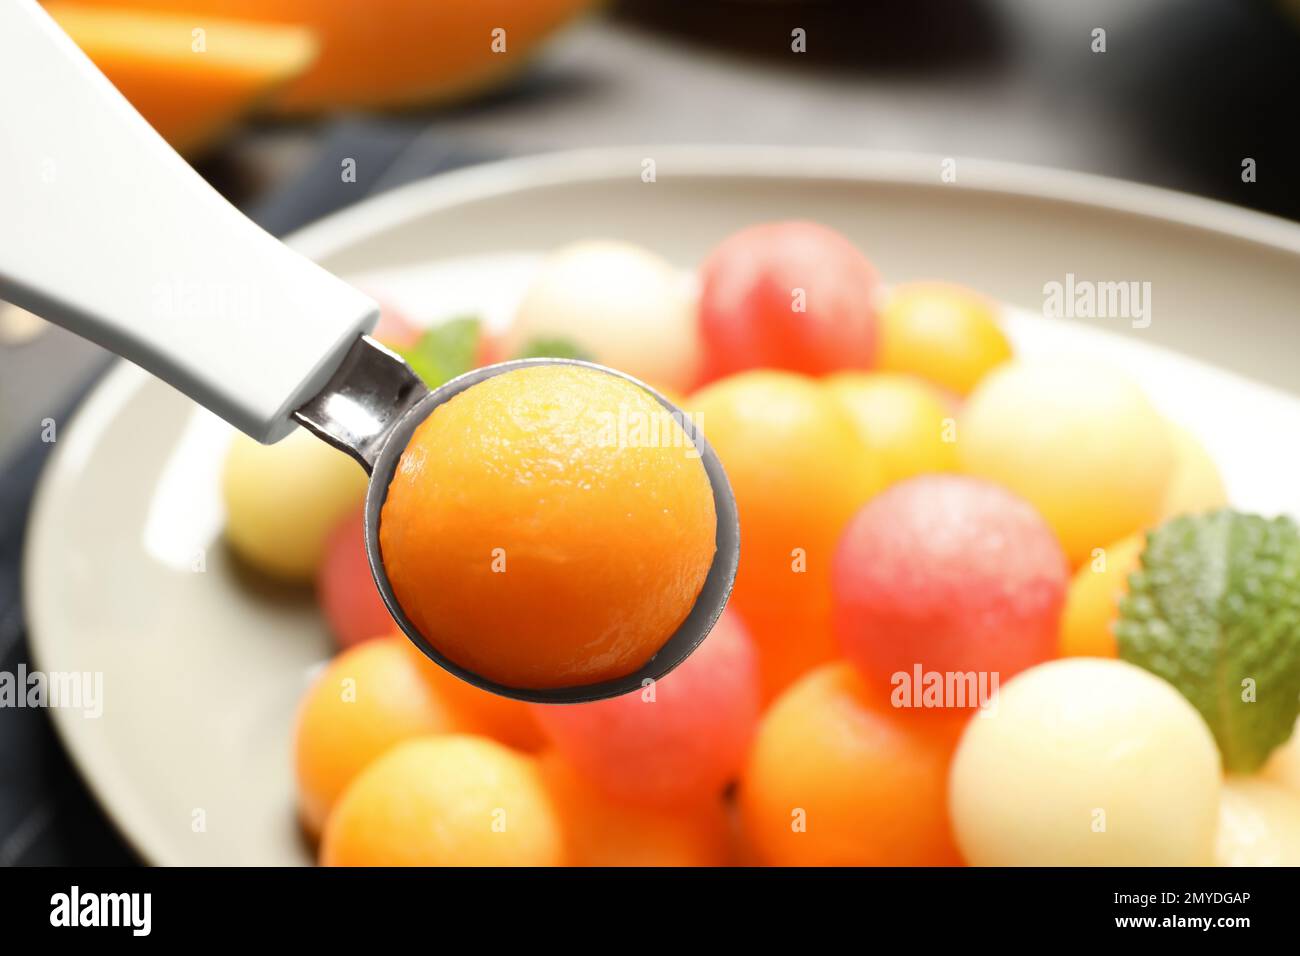 Scoop with melon ball near plate of fruit salad, closeup Stock Photo